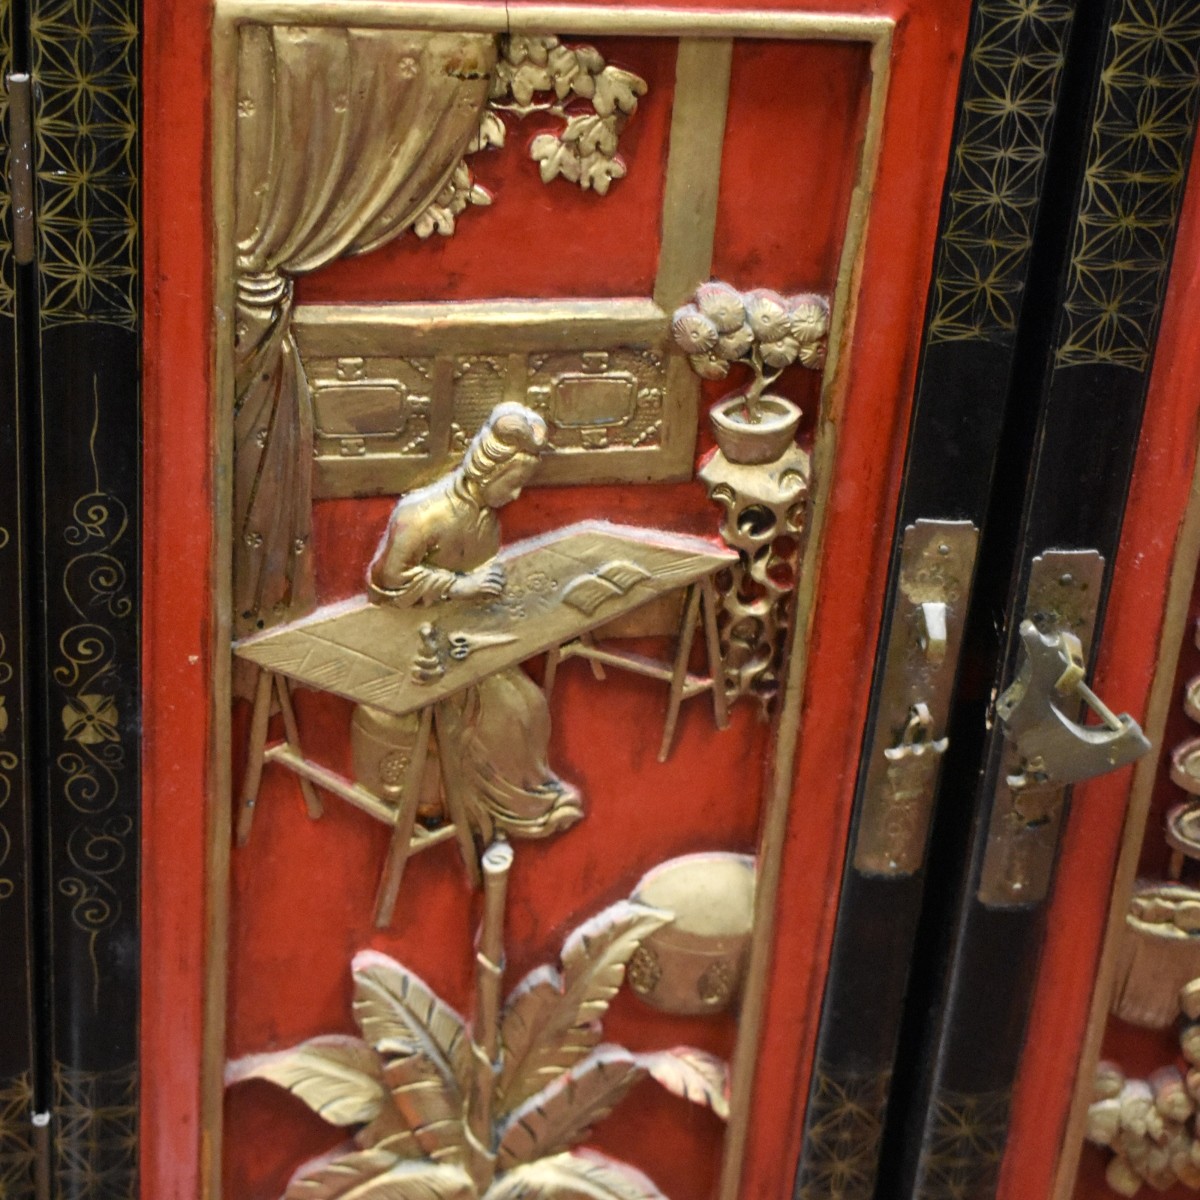 Chinese Lacquer Wood Cabinet